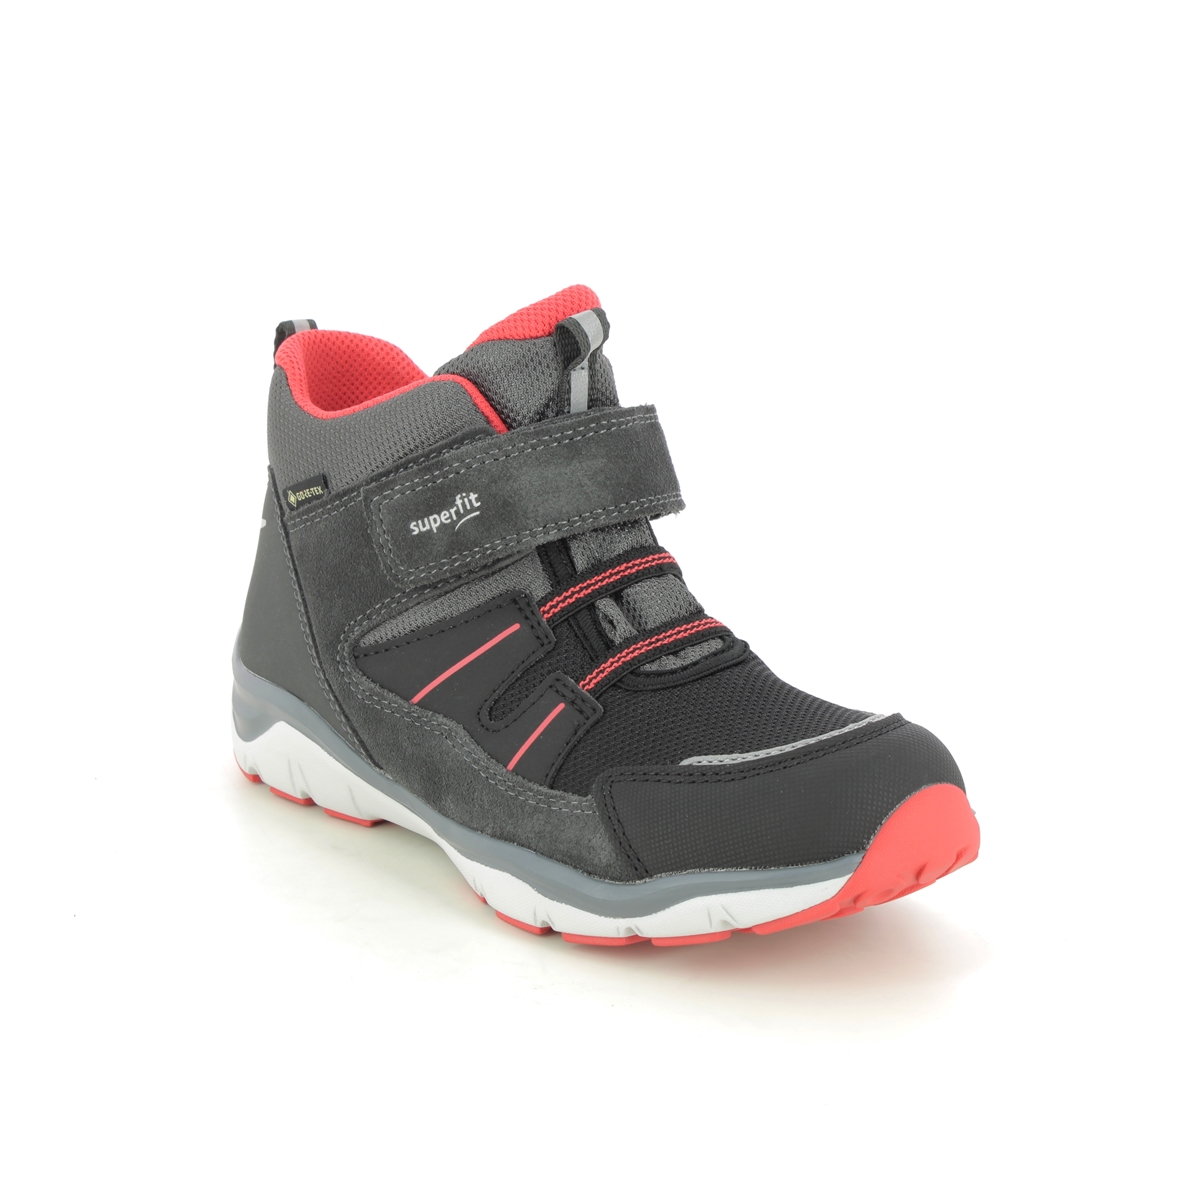 Superfit Sport5 Gore Tex Grey Red Kids Boys Boots 1000247-2000 In Size 32 In Plain Grey Red For kids